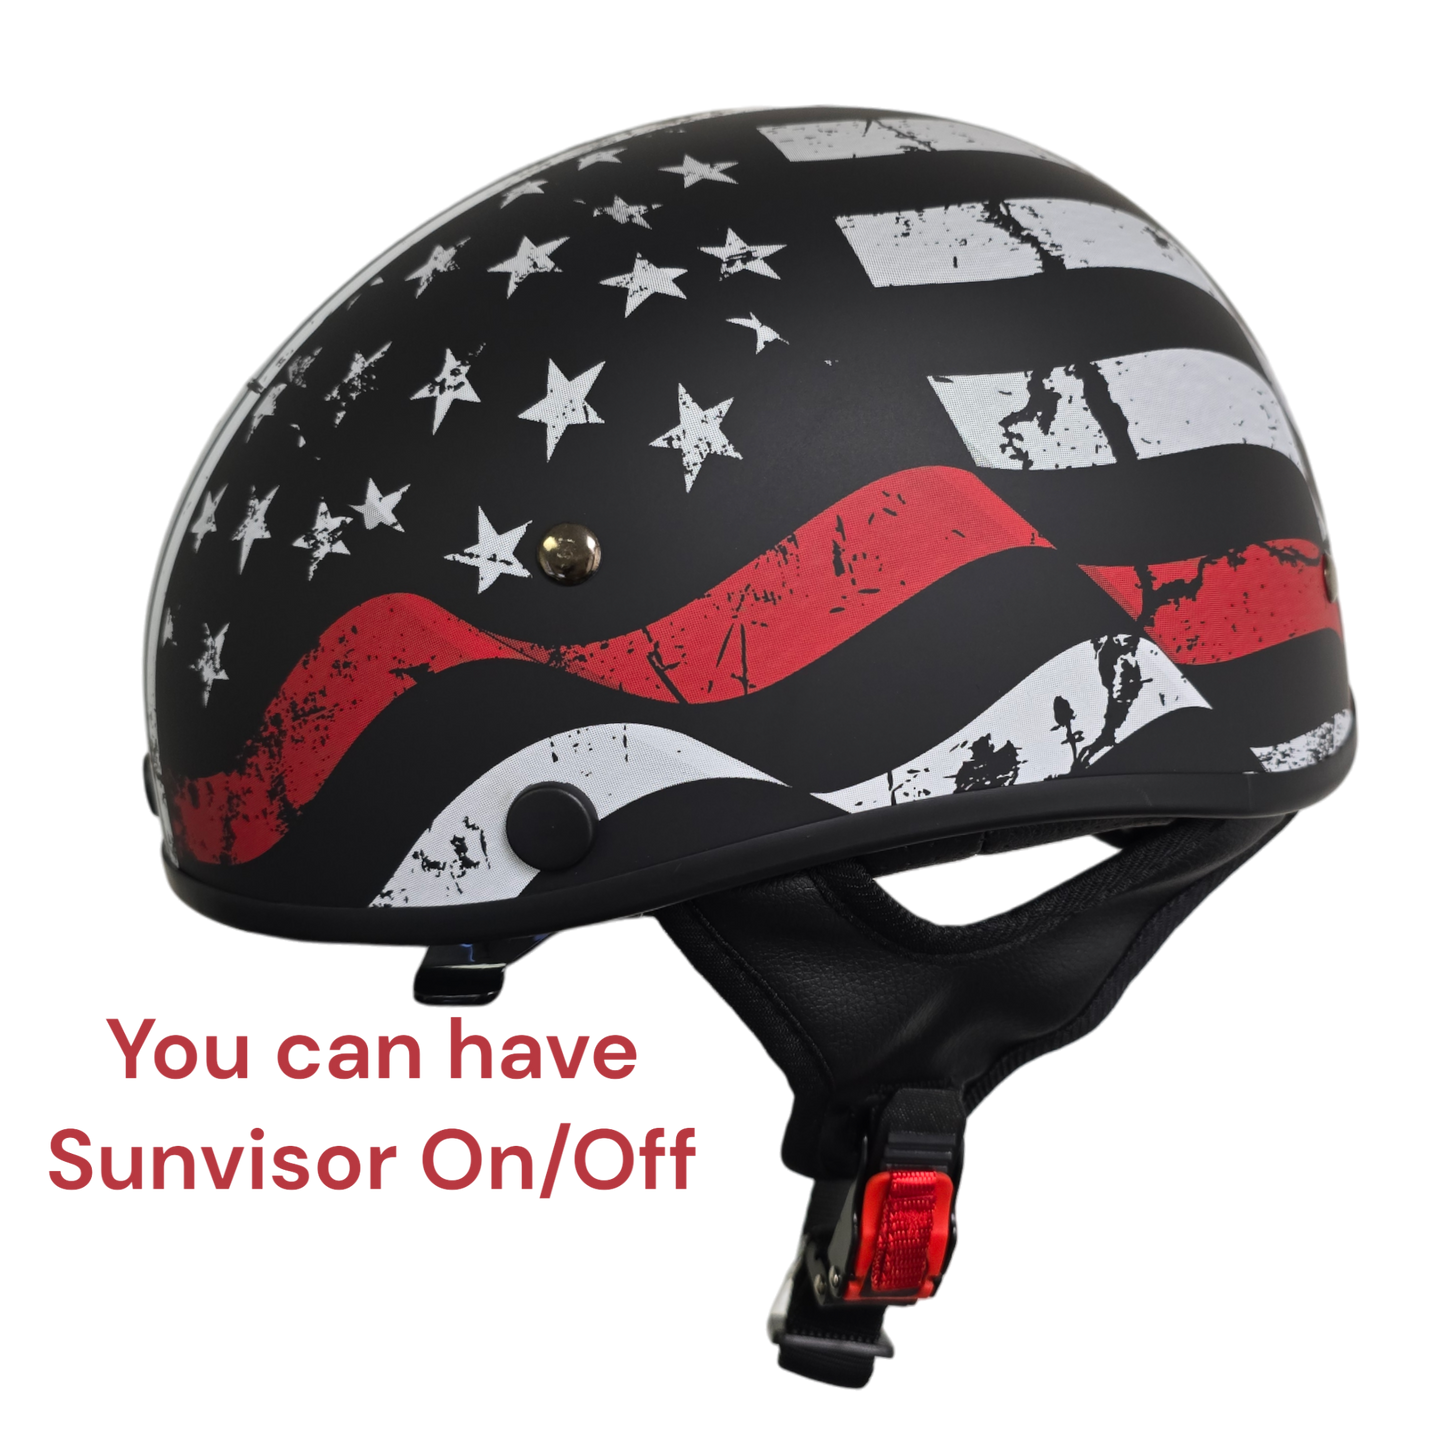 Vega Warrior Half Helmet with size adjuster, dropdown shield and sunvisor - Back the Red